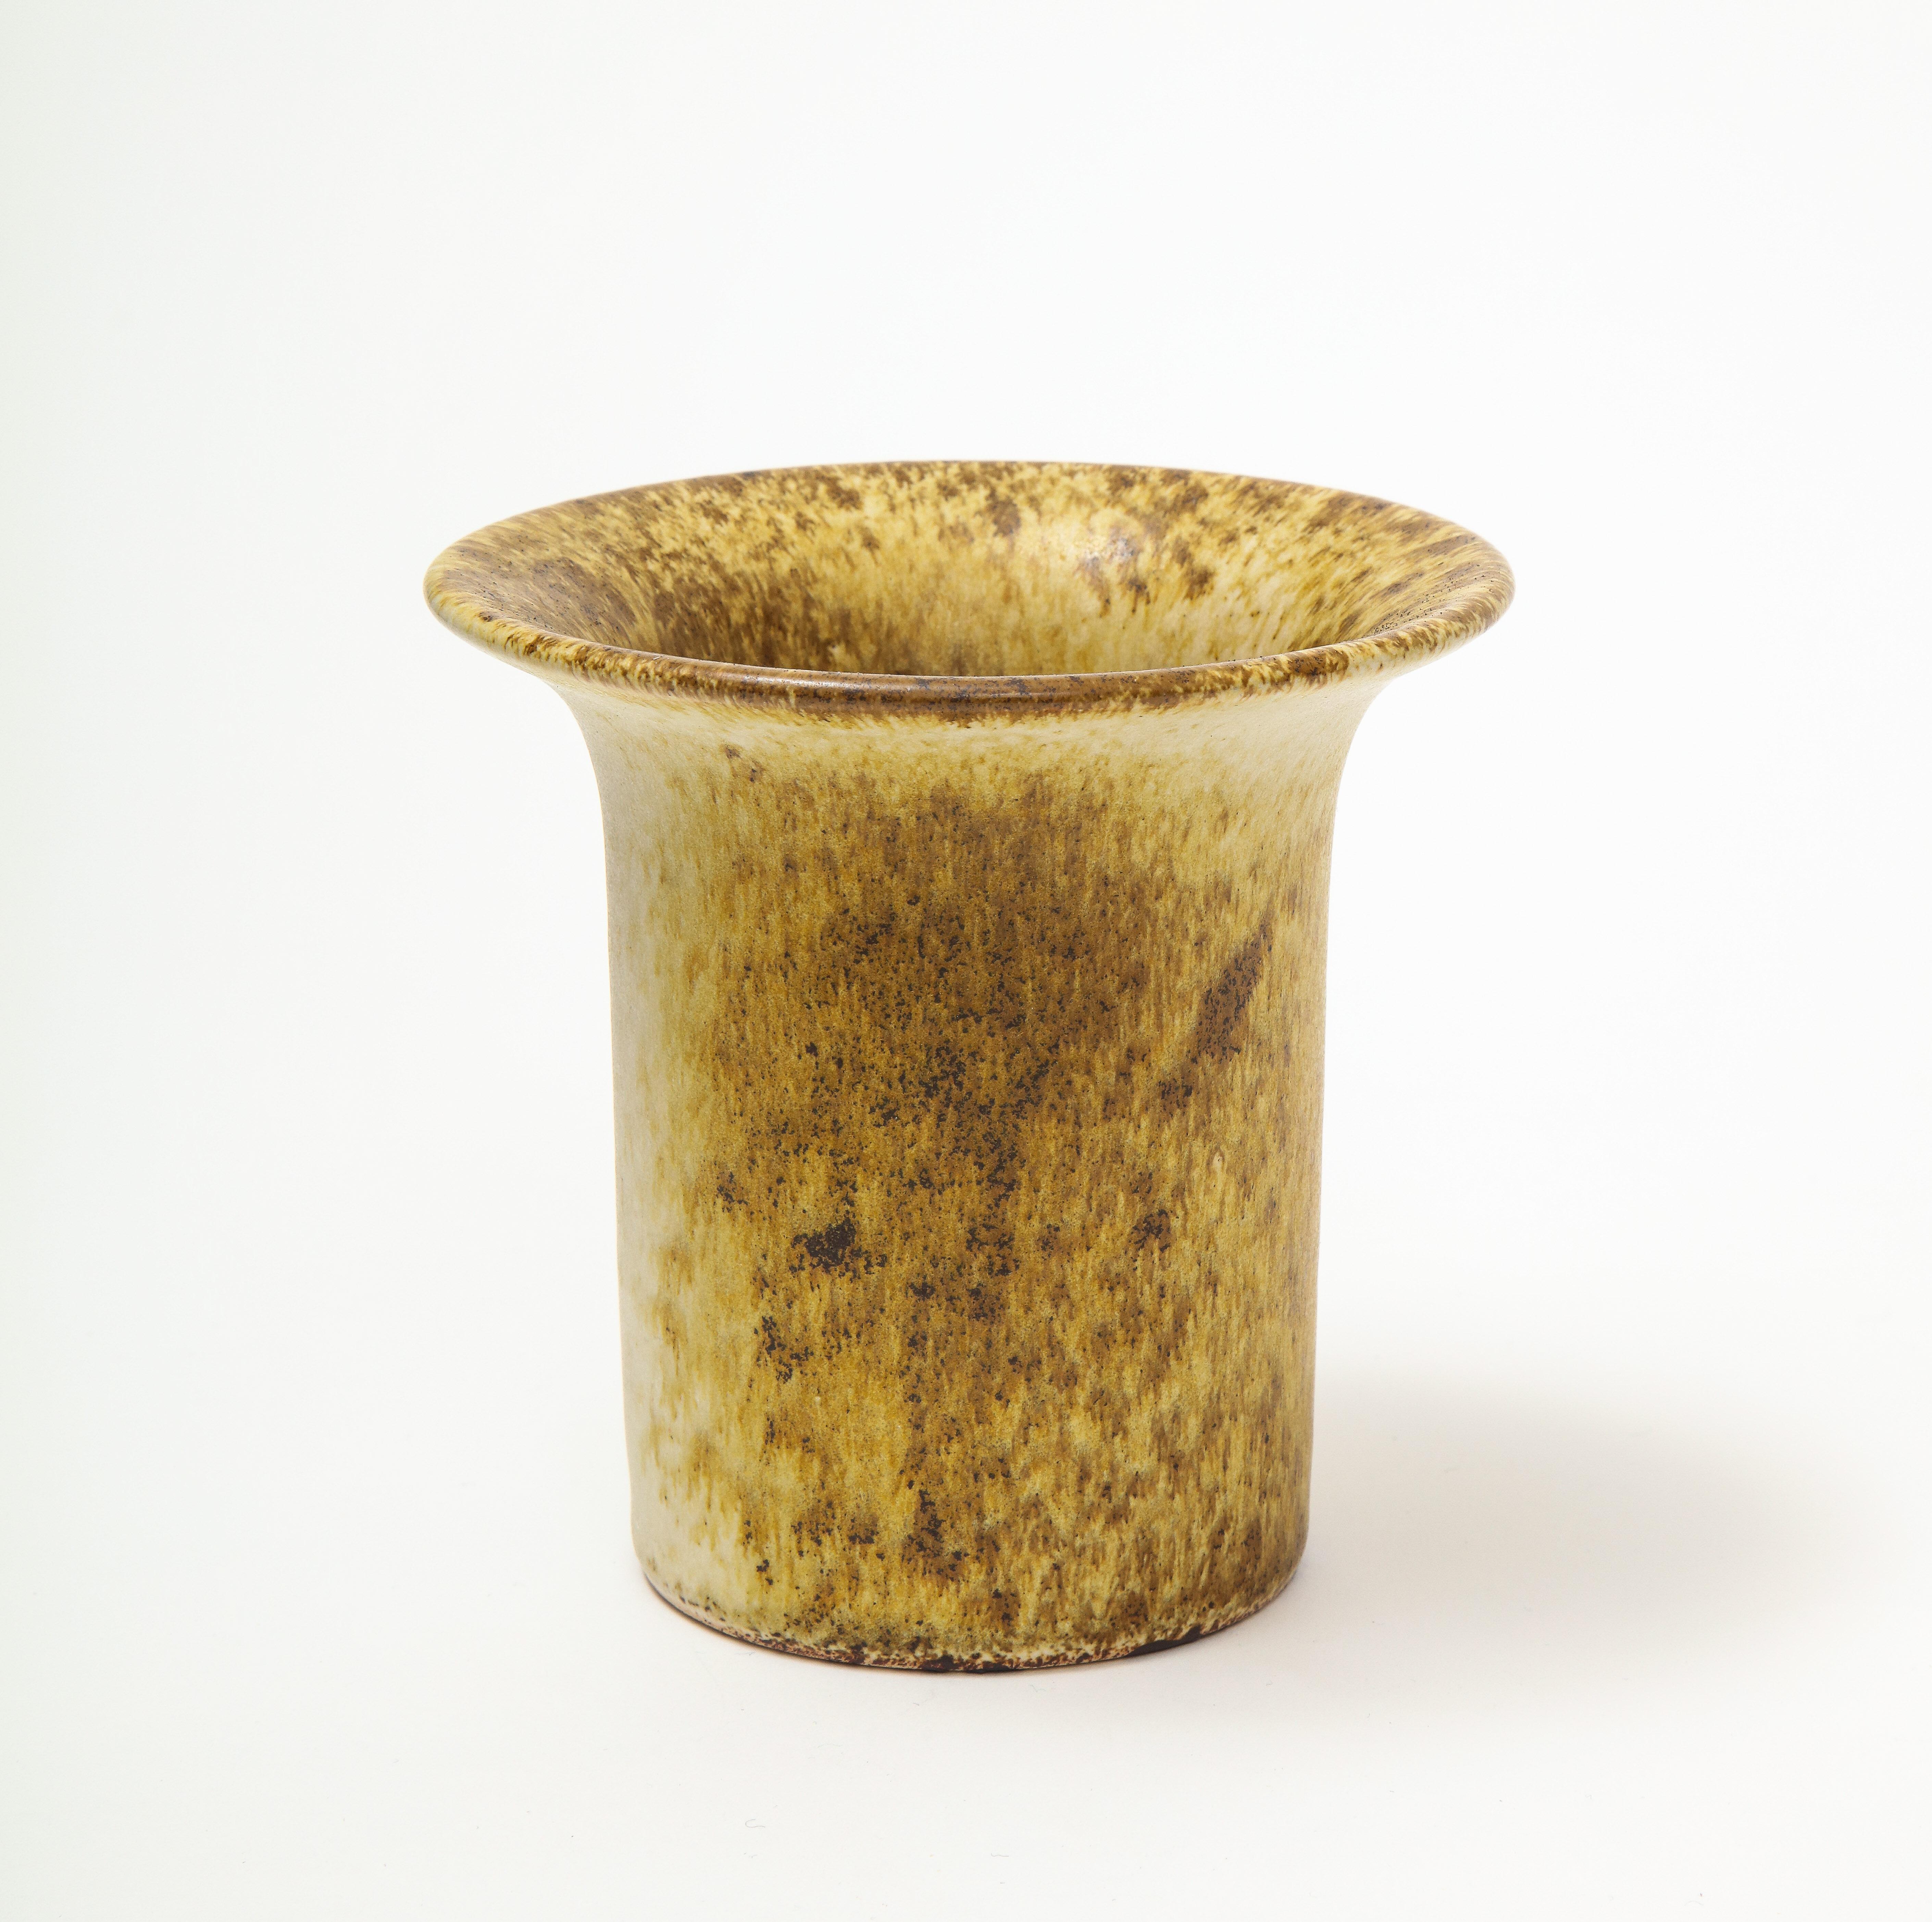 Short flared speckled yellow ceramic vase, Germany, circa 1970s.